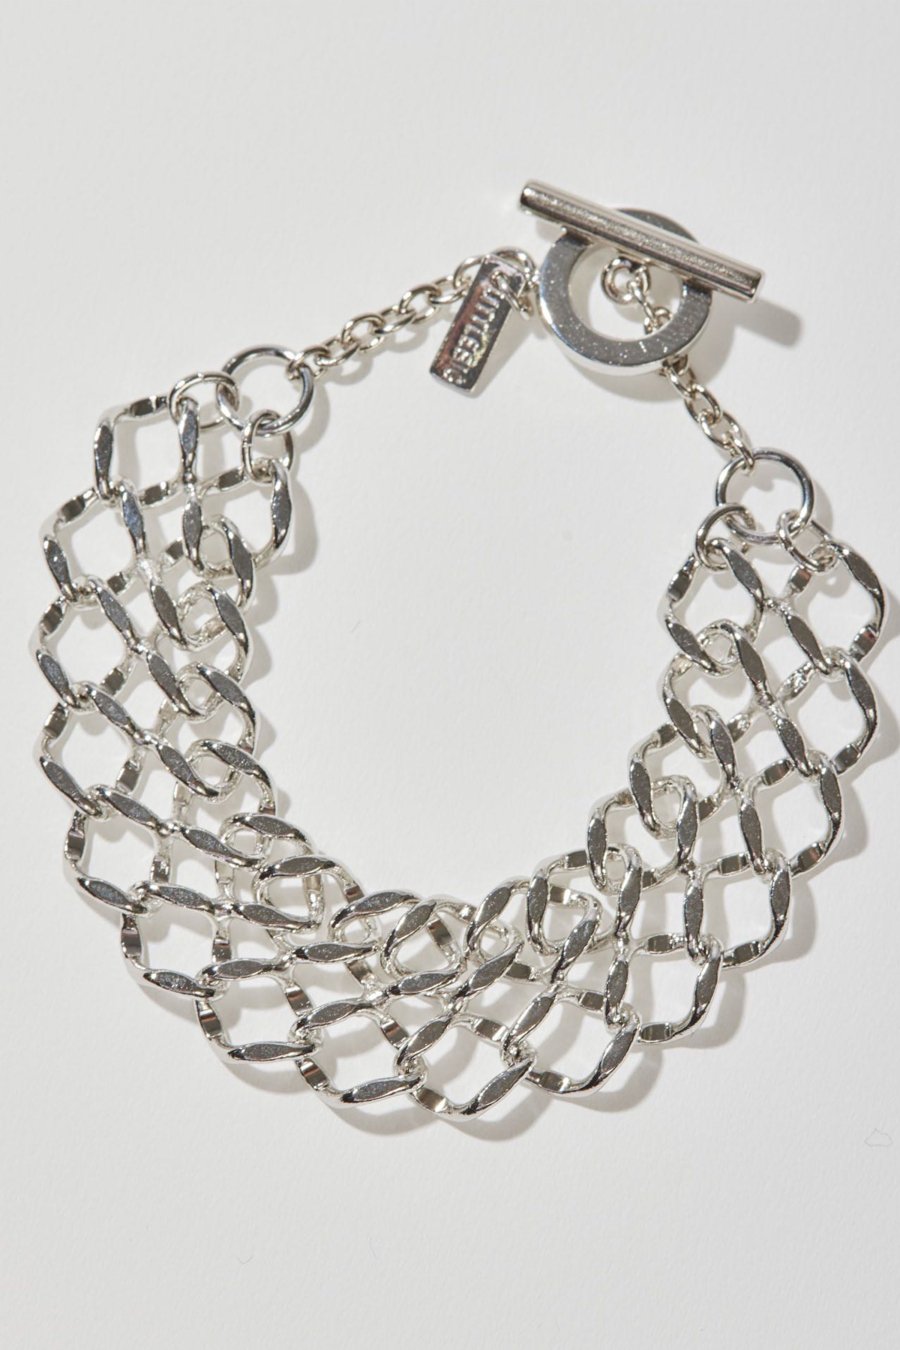 LITTLEBIG  Duo Chain Bracelet<img class='new_mark_img2' src='https://img.shop-pro.jp/img/new/icons15.gif' style='border:none;display:inline;margin:0px;padding:0px;width:auto;' />